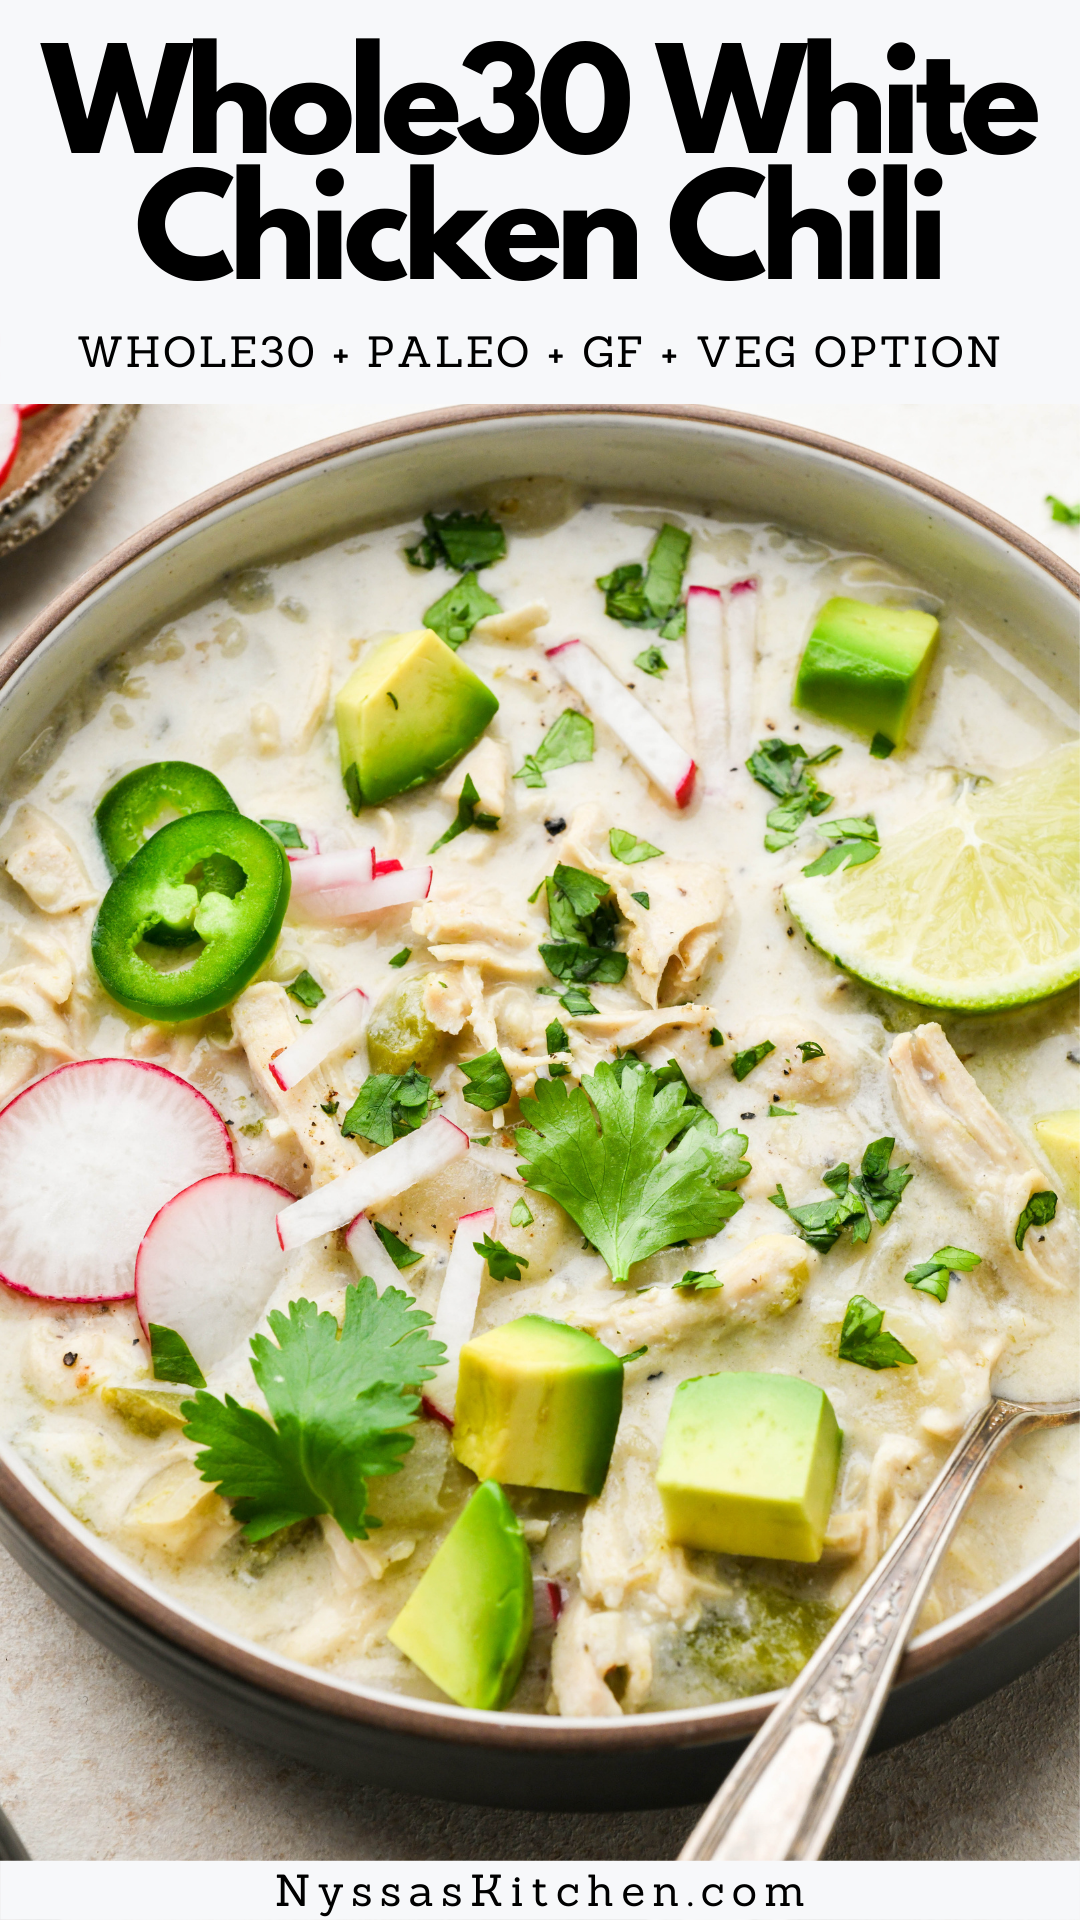 This Whole30 white chicken chili is the perfect easy to make soup for those cold weather days! Made with two kinds of peppers, onions, garlic, a homemade seasoning blend, shredded chicken, and dairy free cashew cream. A healthy and satisfying twist on a southwest classic! Paleo, Whole30, dairy free, gluten free, vegan option.